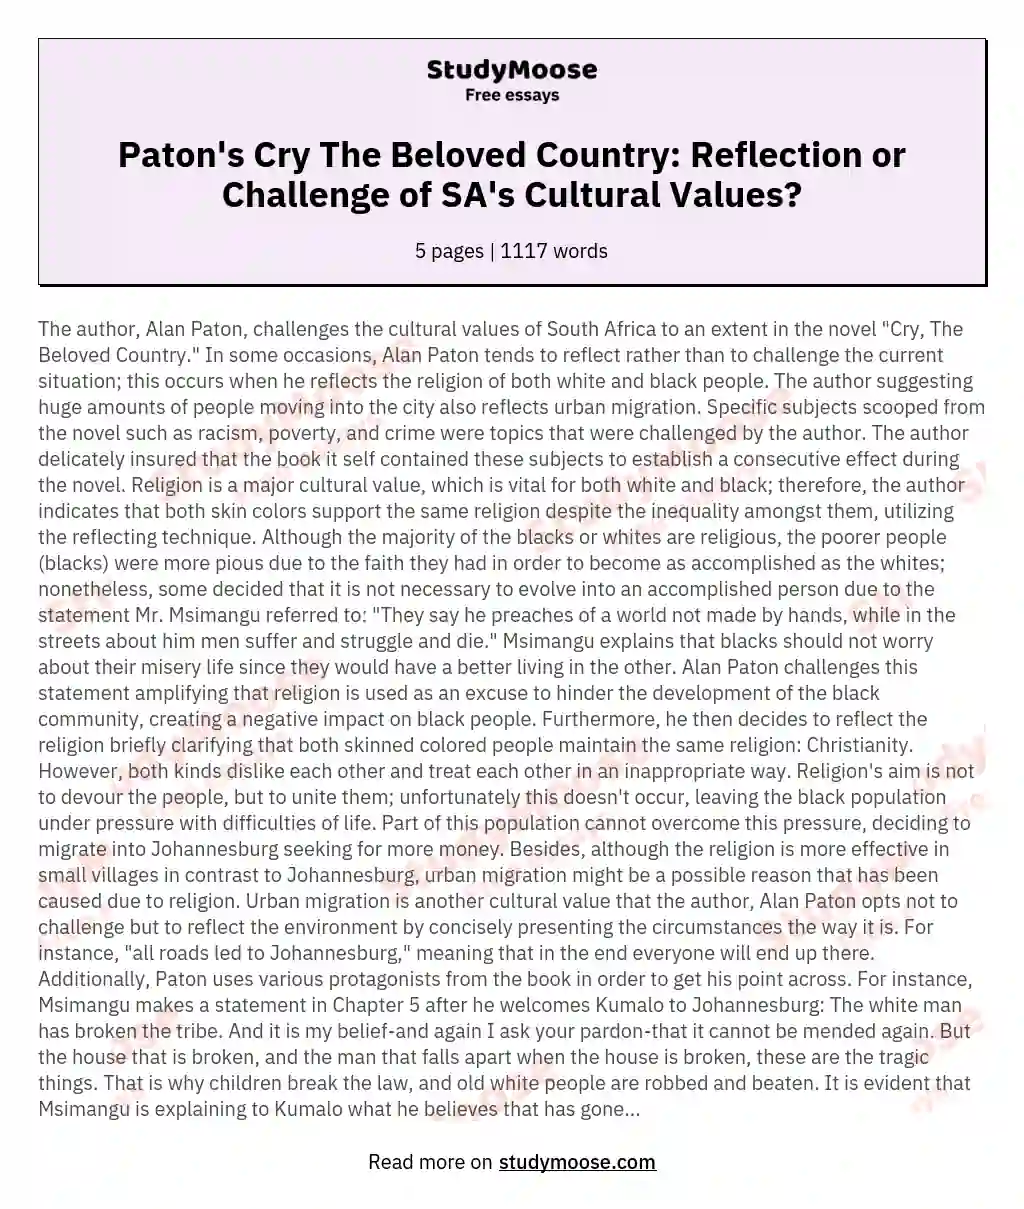 In "Cry, The Beloved Country," does Alan Paton reflect or challenge the cultural values of South Africa?